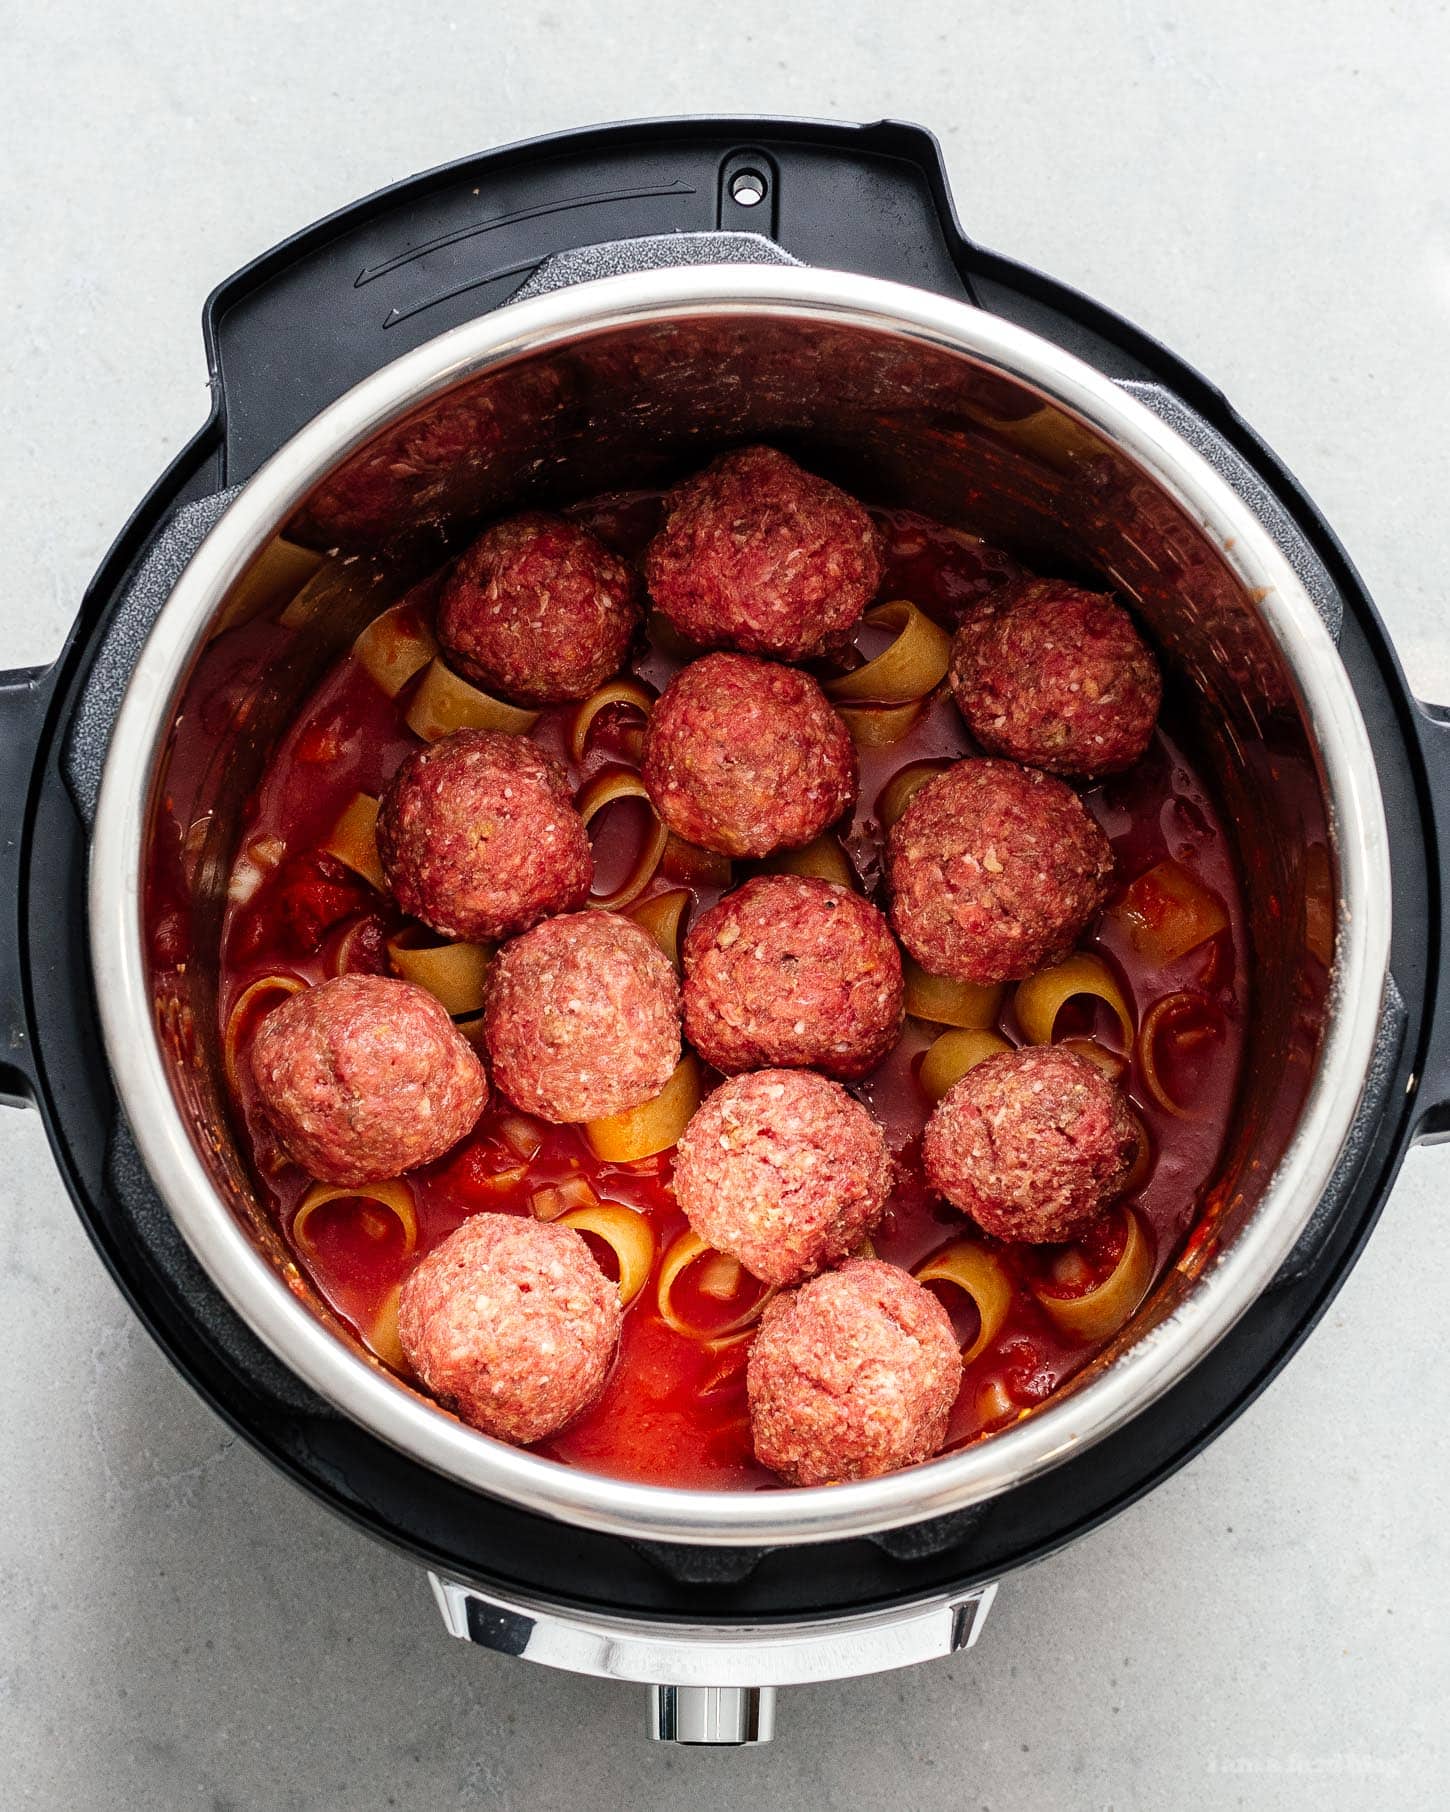 You're only 10 minutes away from the best pasta and meatballs you've ever made with this super easy one-pot instant pot pasta and meatballs recipe.